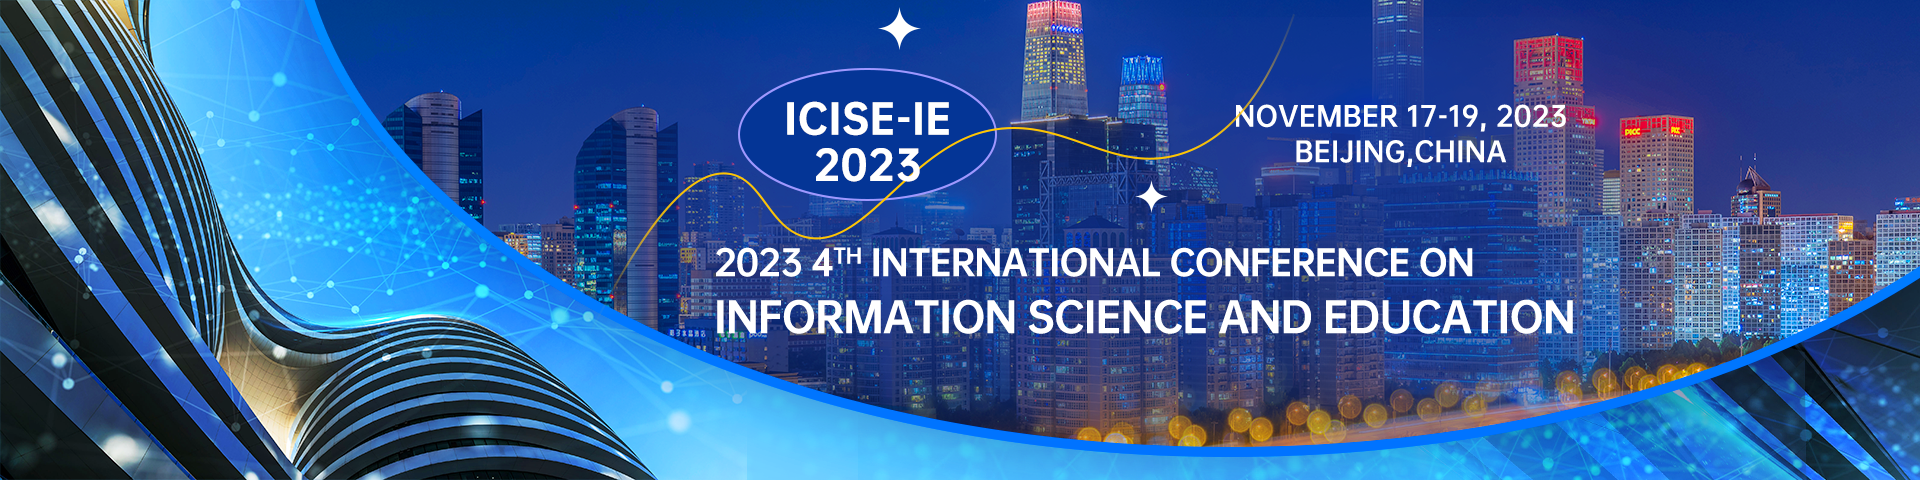 ICISE-IE 2023